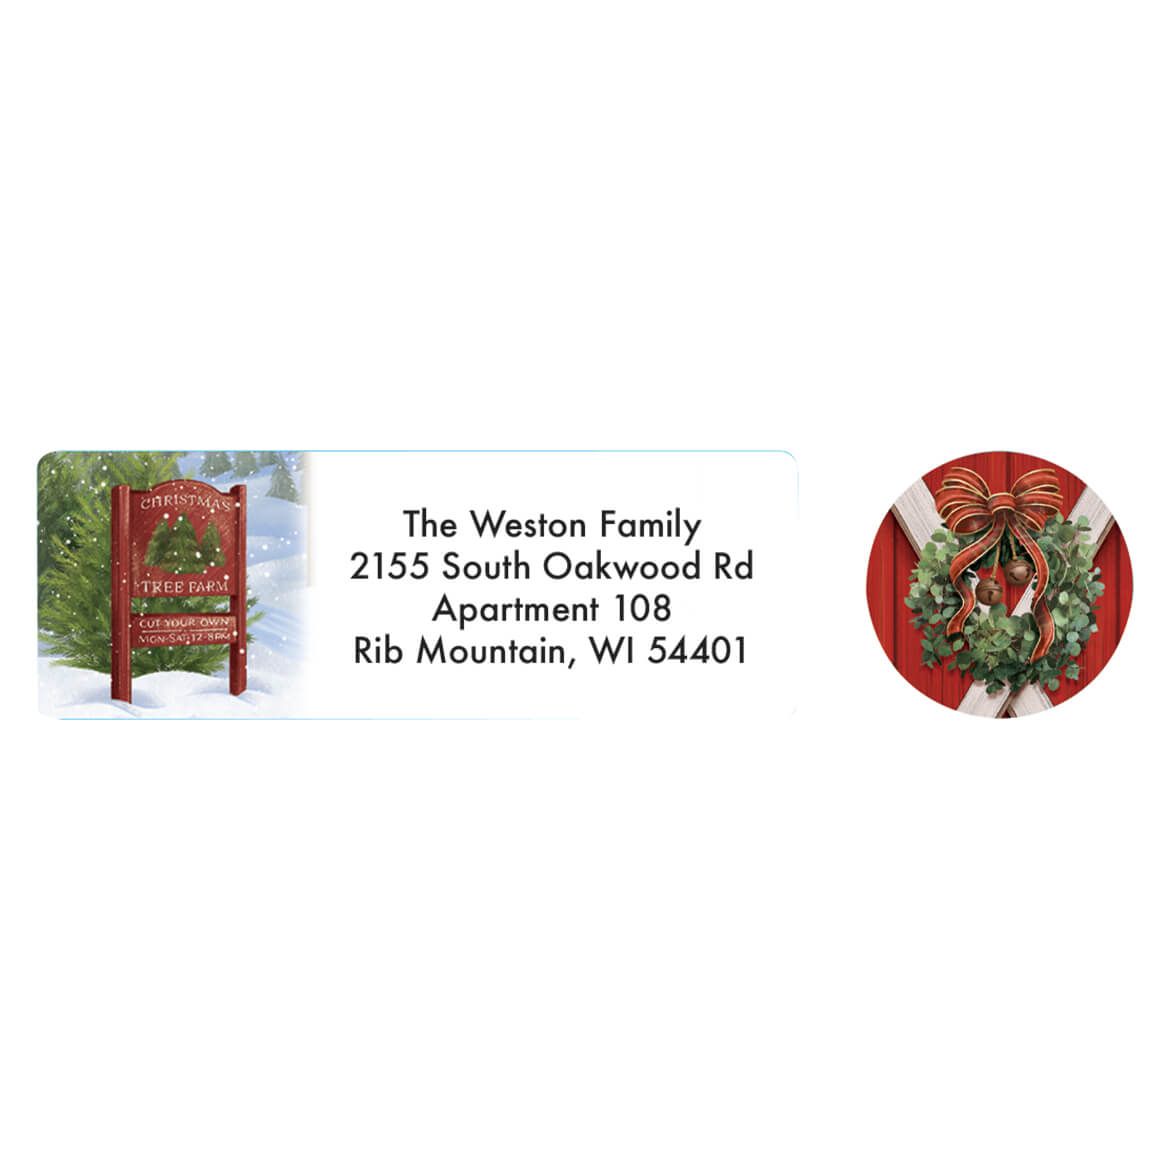 Personalized Christmas Tree Farm Labels and Seals, Set of 20 + '-' + 373641